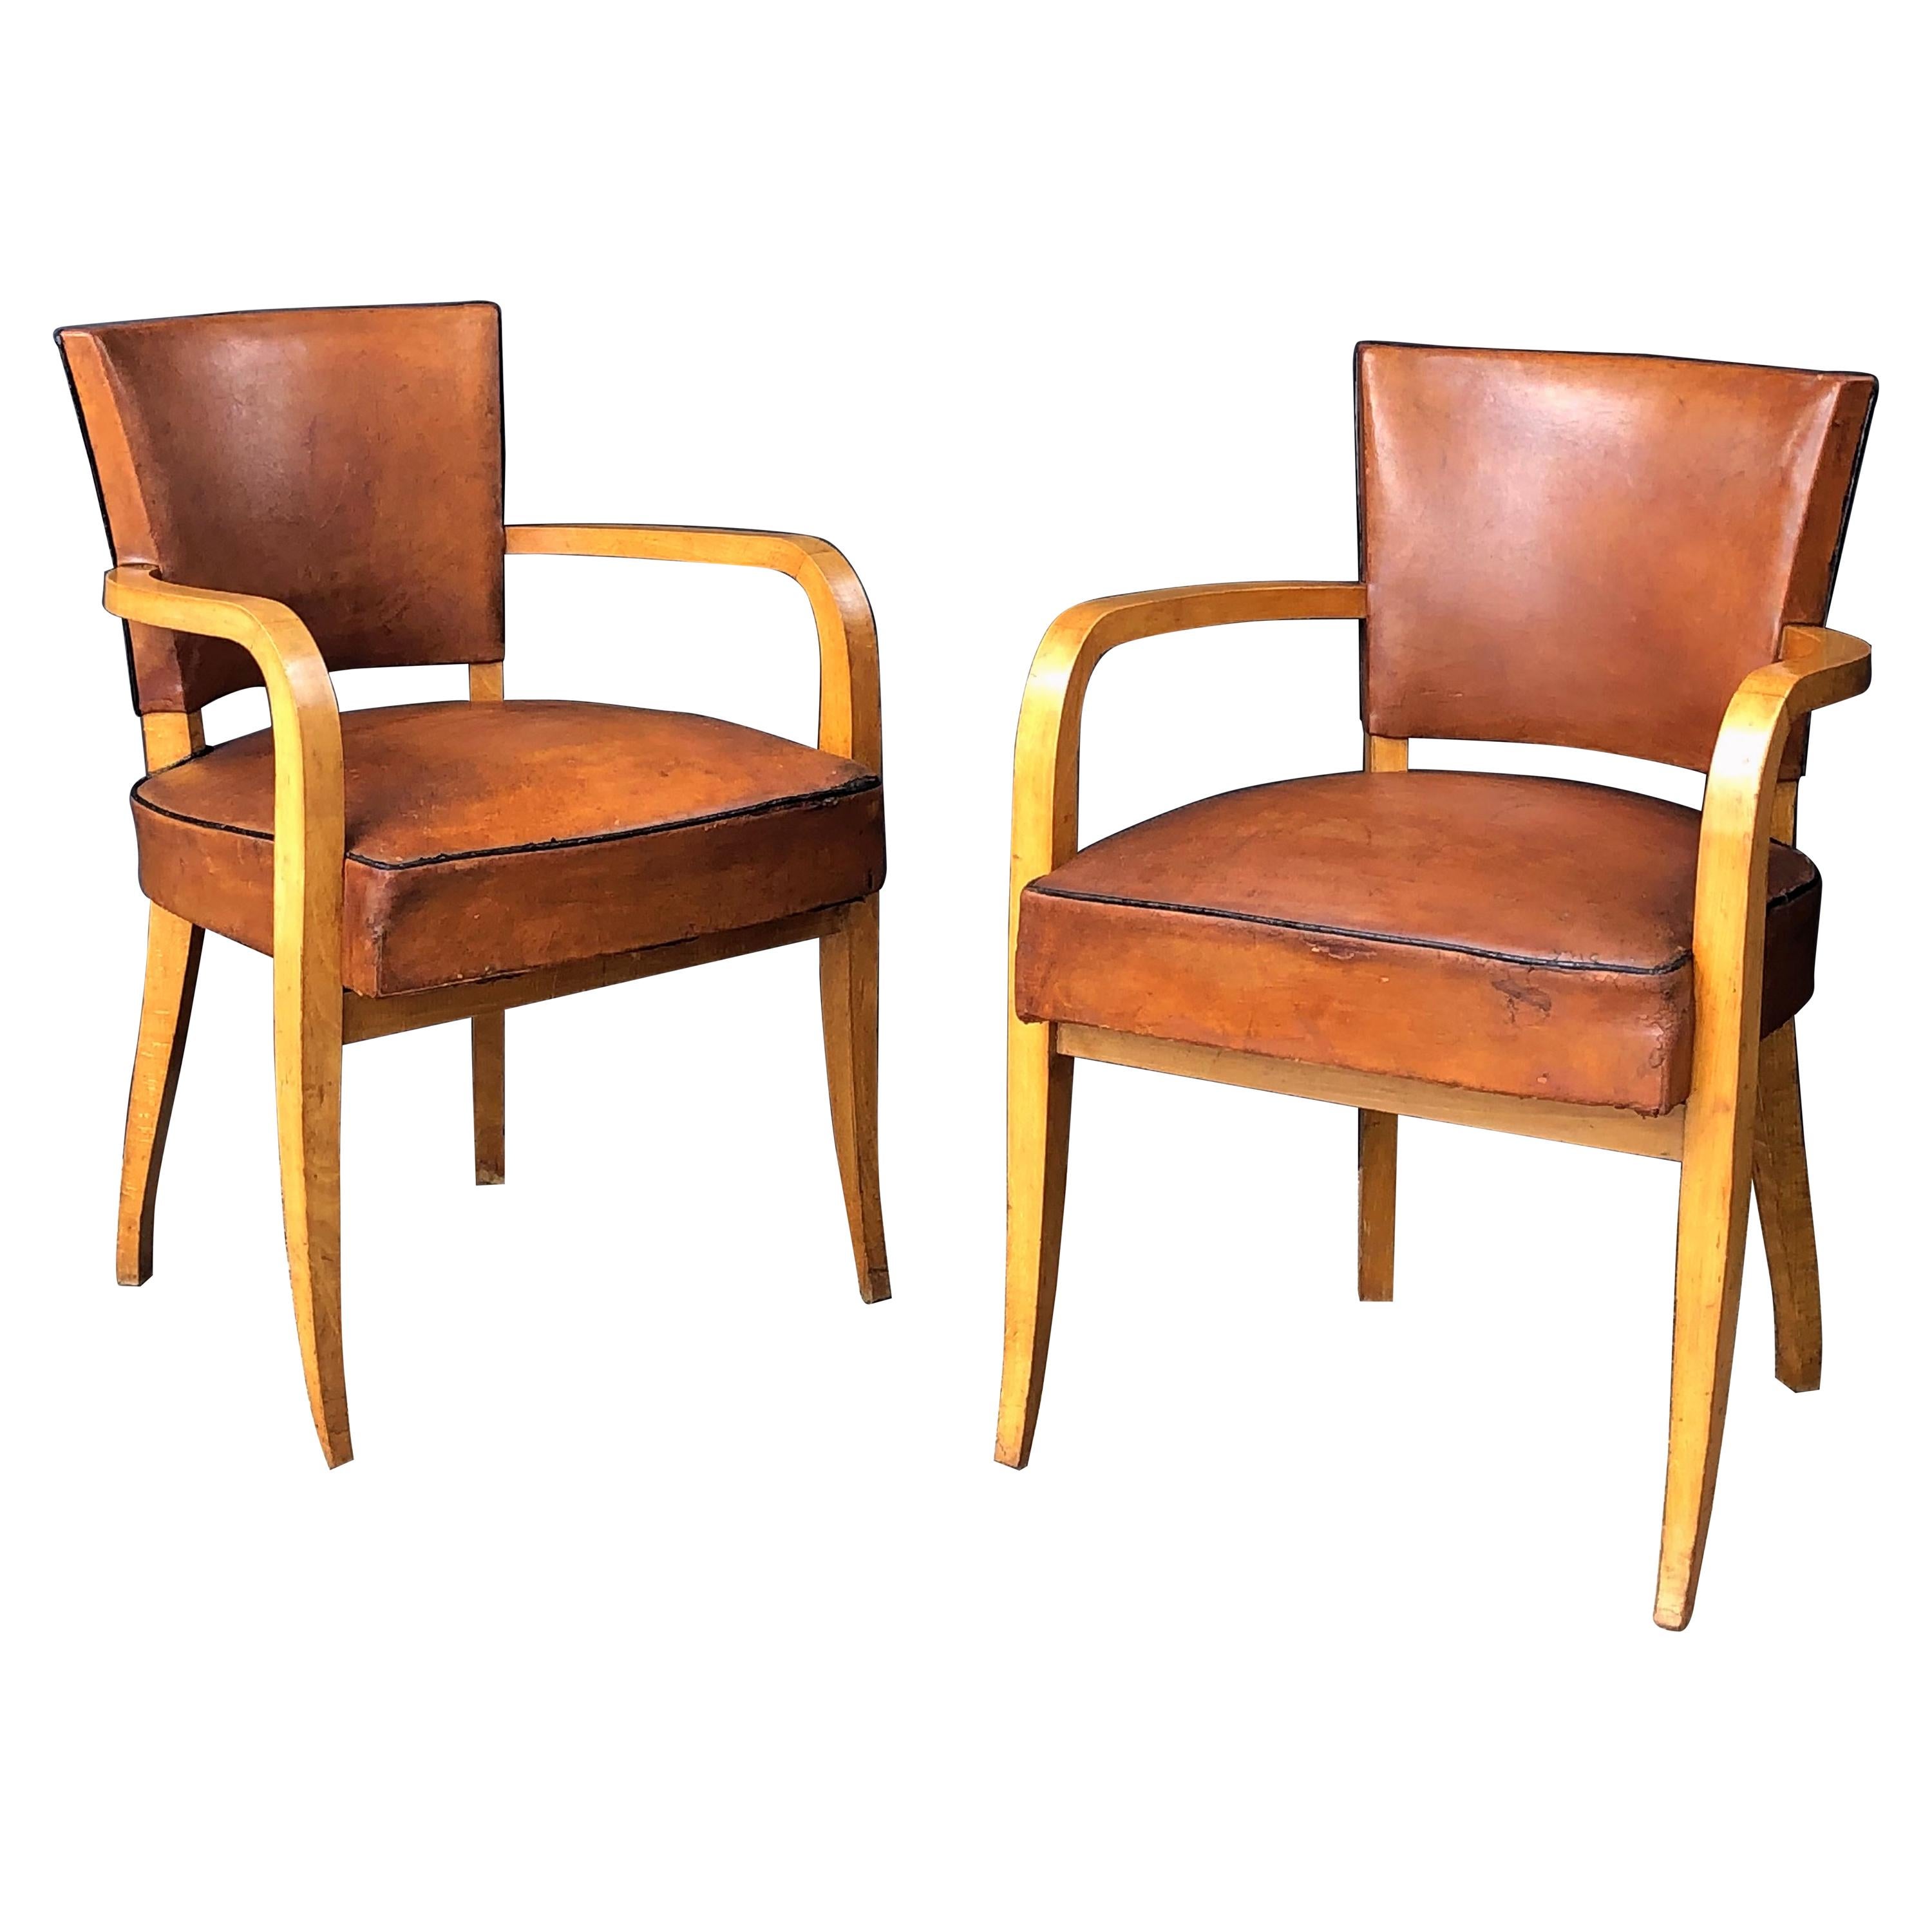 Pair of French Leather Covered Bridge Chairs 'Individually Priced'